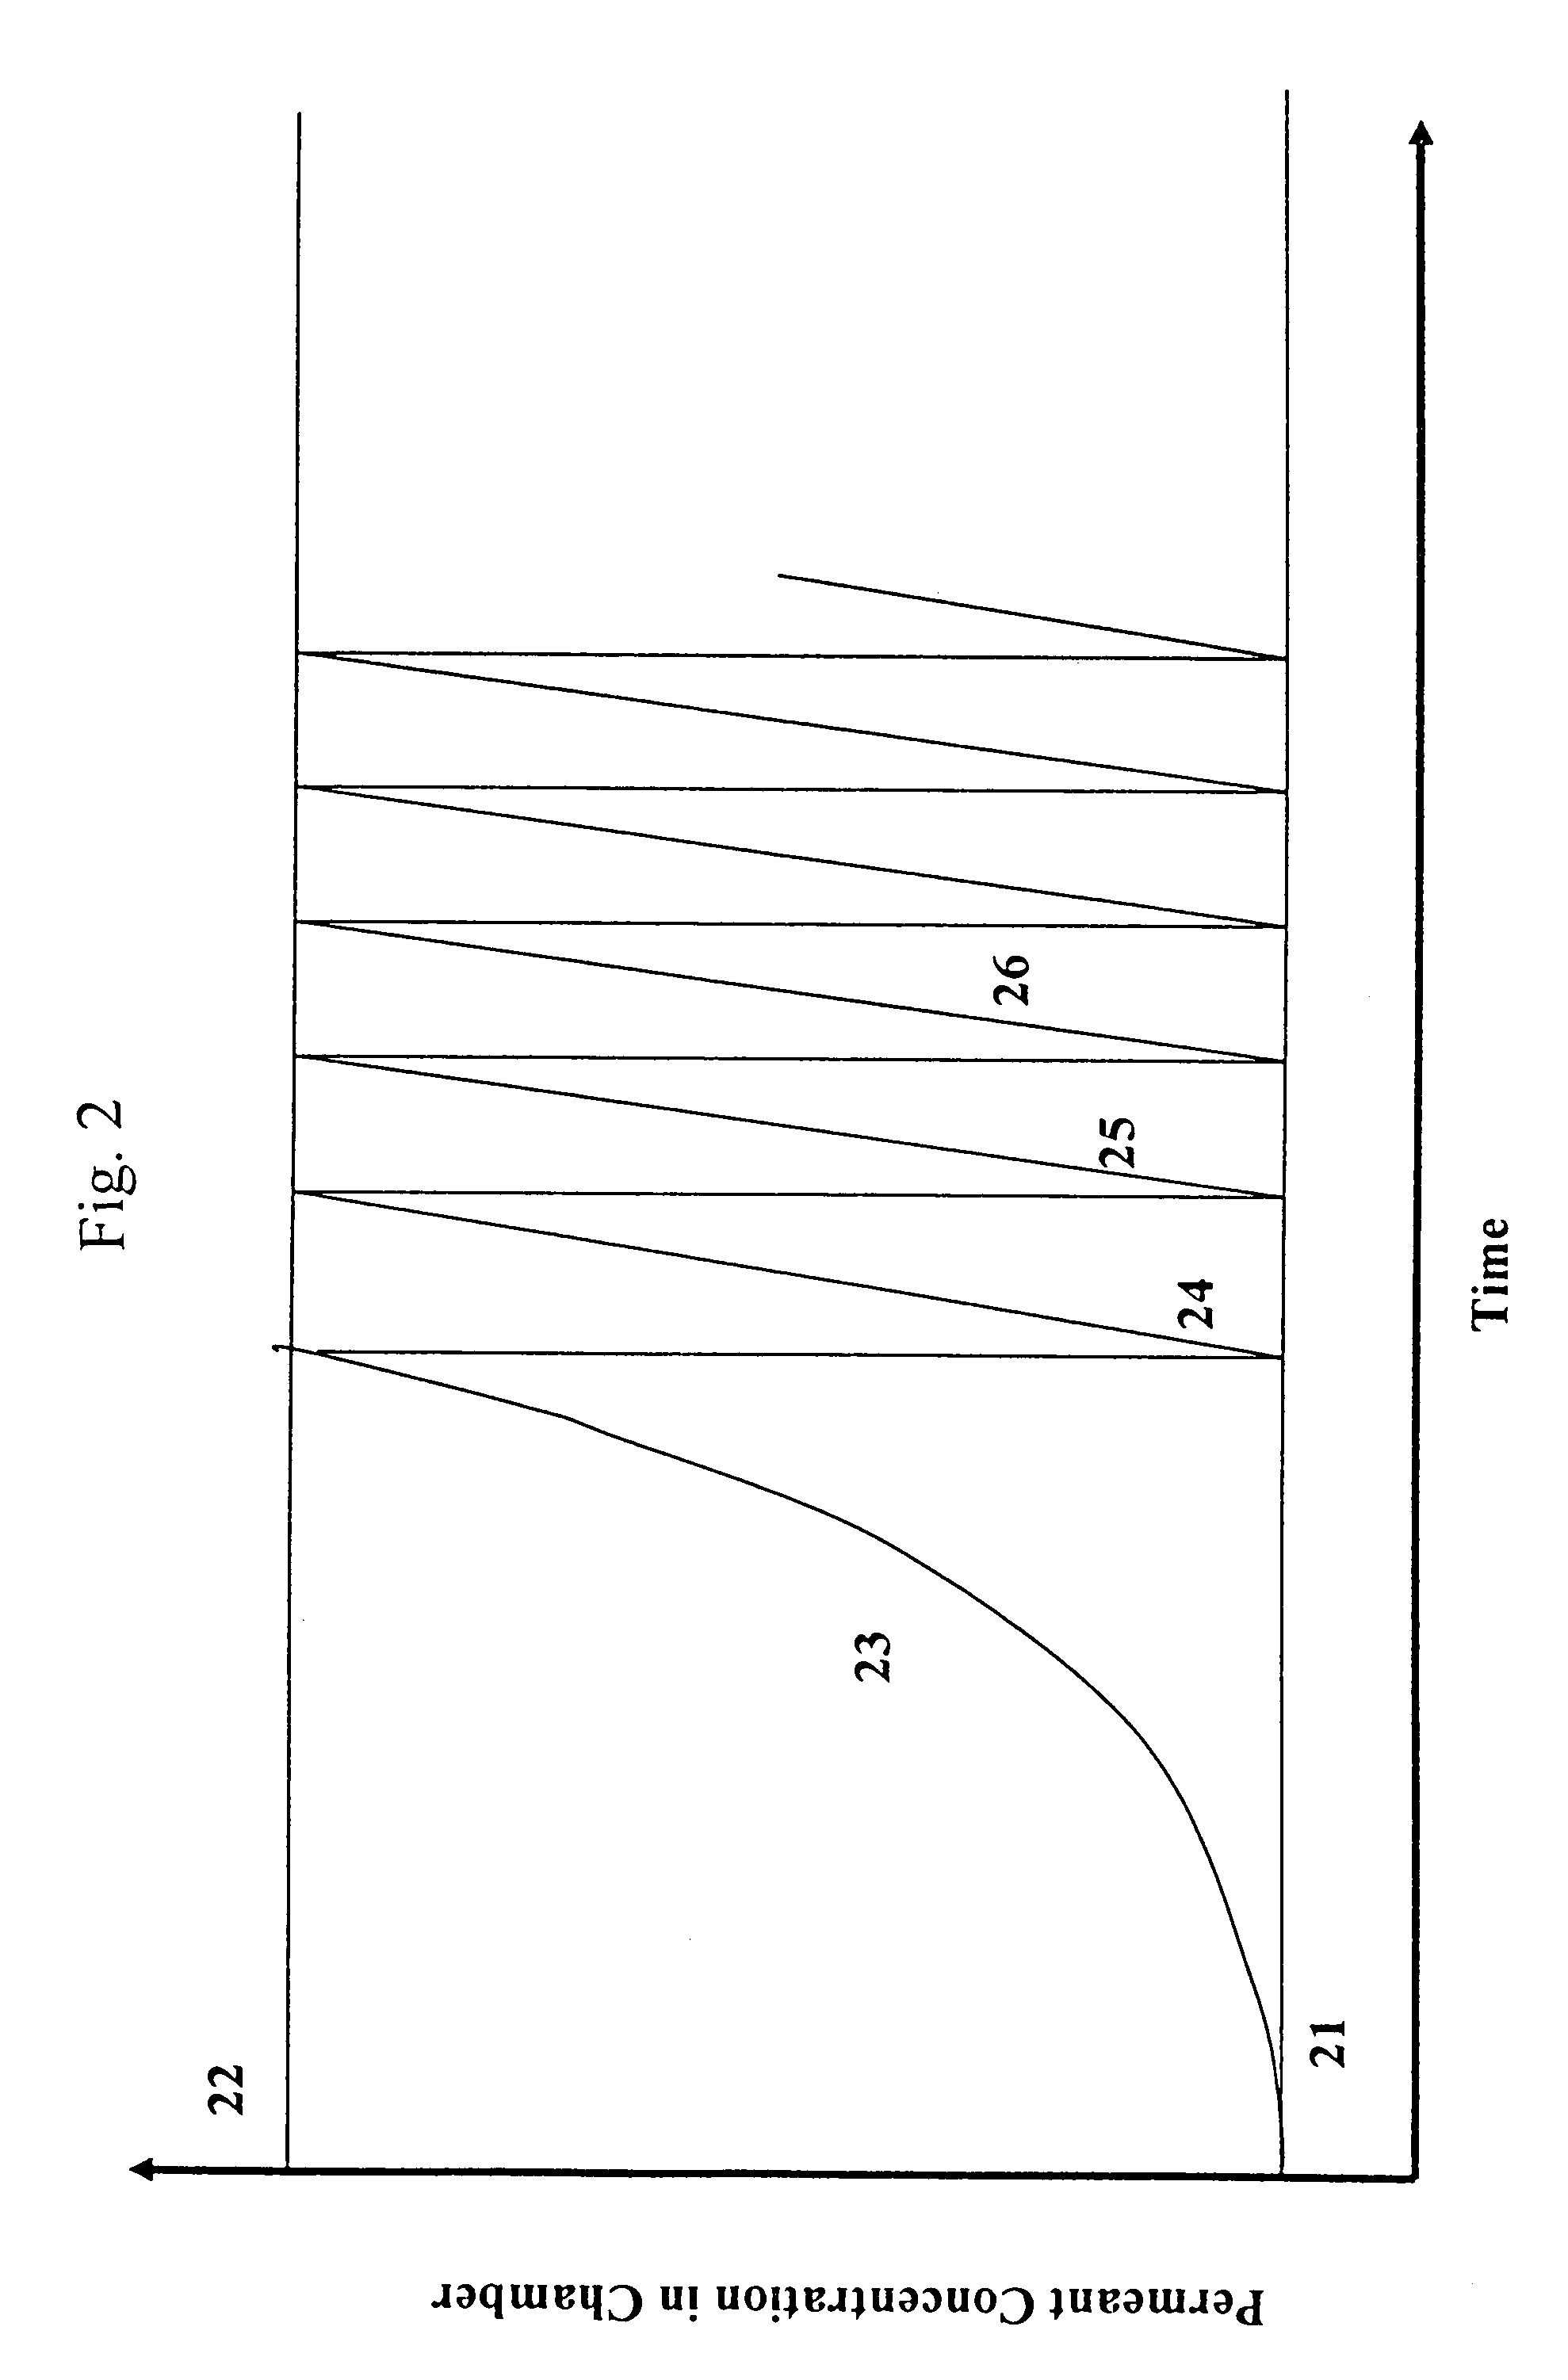 Apparatus and technique for measuring permeability and permeant sorption